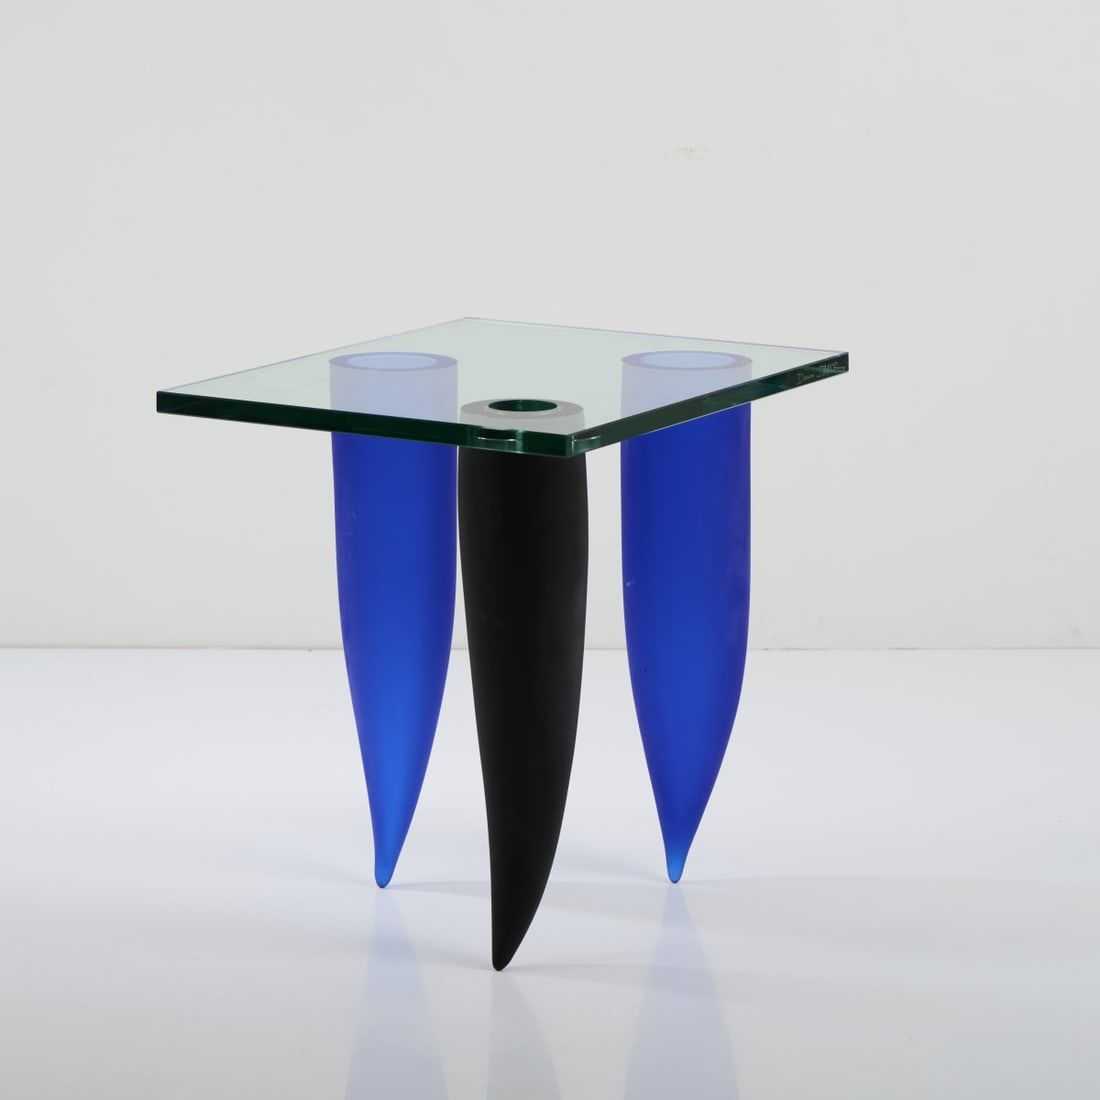 A Philippe Starck 1988 coffee table dubbed Trois Étrangetés sous un Mur (Three Strangers under a Wall) achieved €5,200 ($5,540) plus the buyer’s premium in October 2023. Image courtesy of Quittenbaum Kunstauktionen GmbH and LiveAuctioneers.